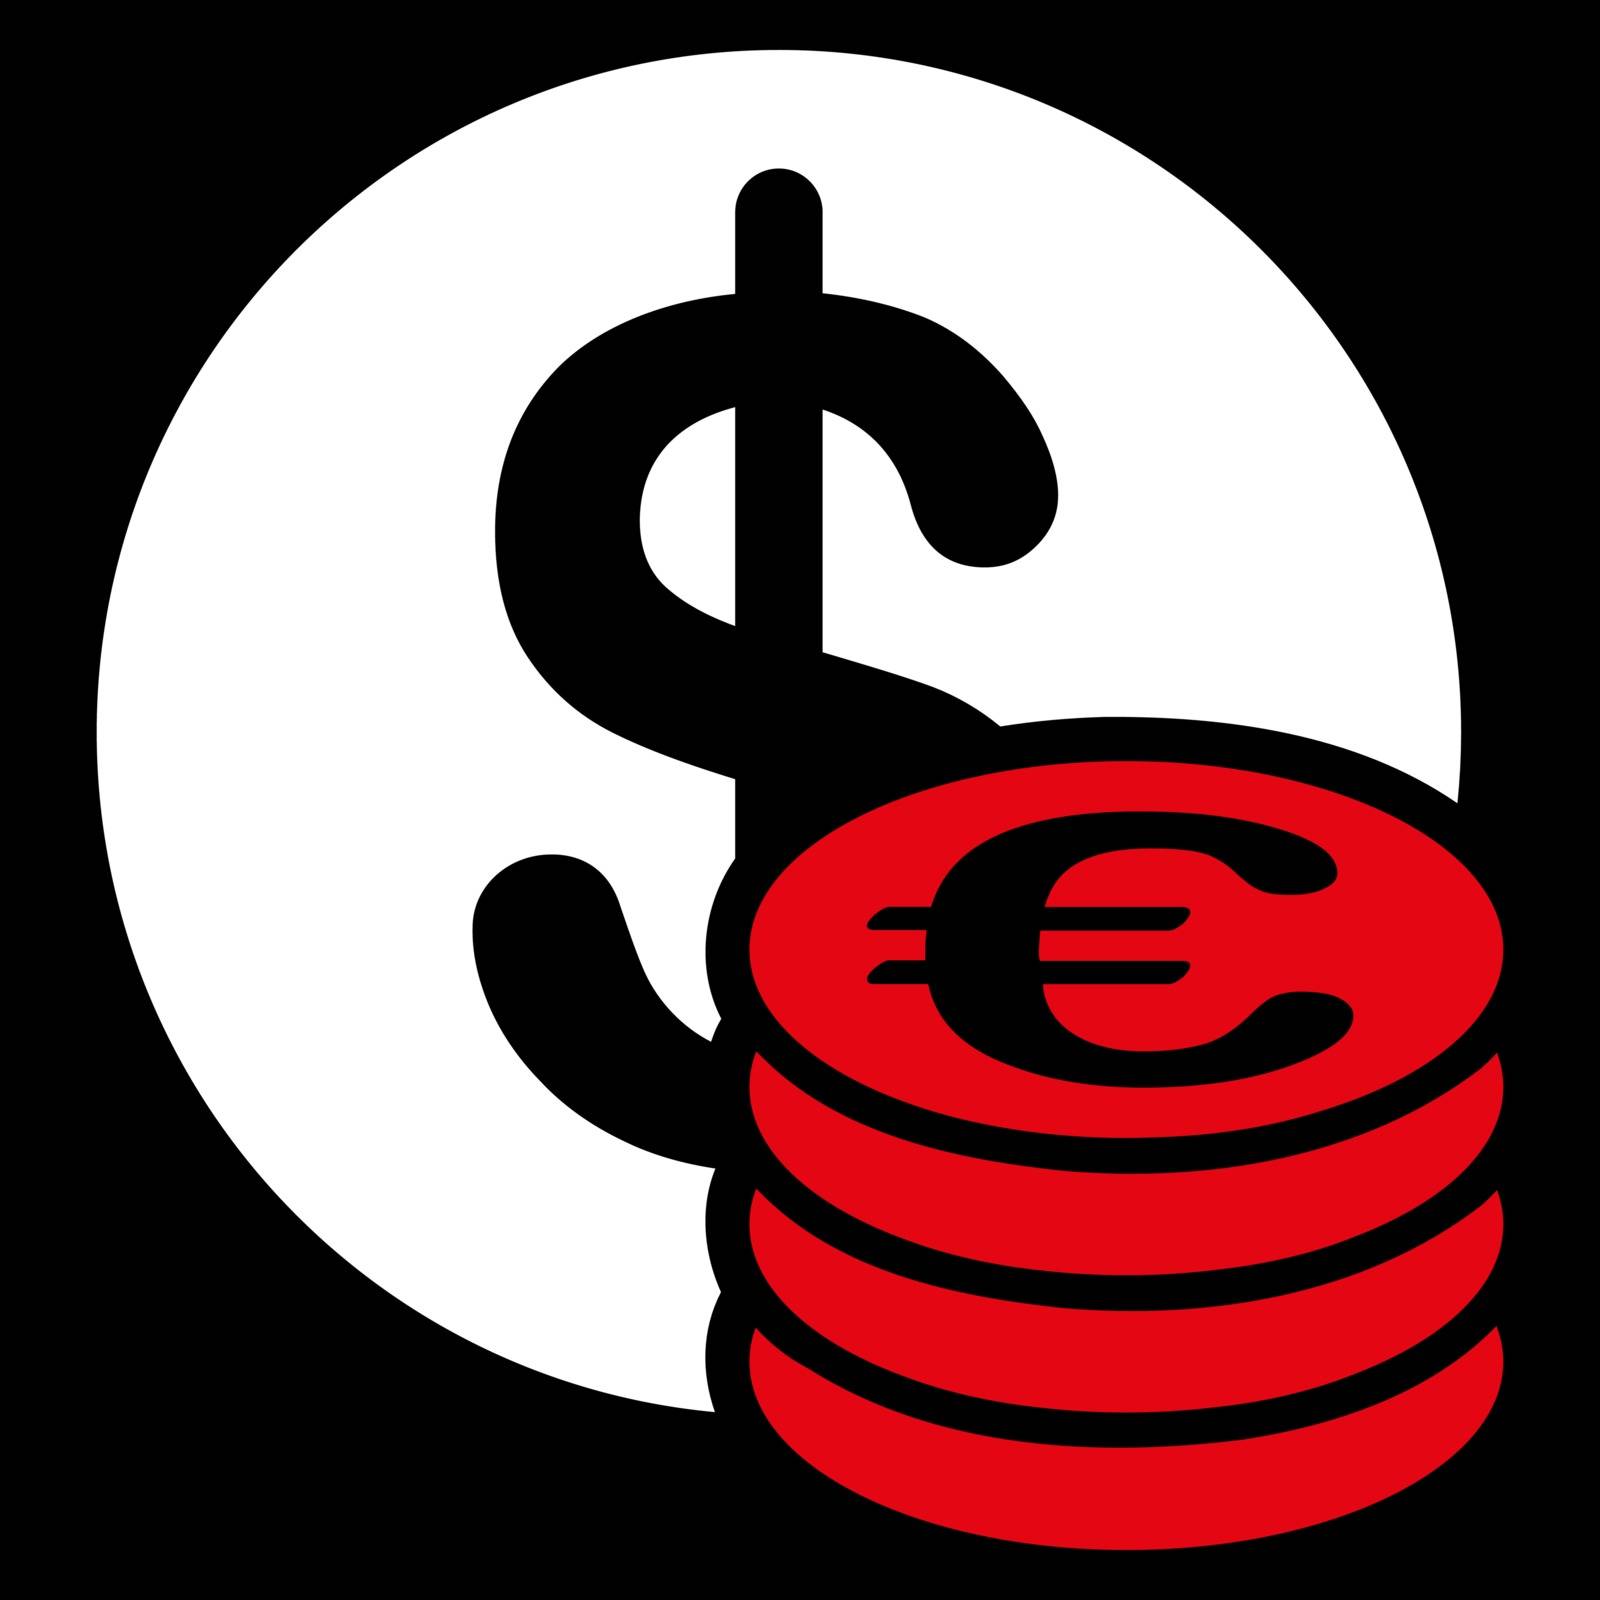 Dollar euro coins icon from BiColor Euro Banking Set by ahasoft